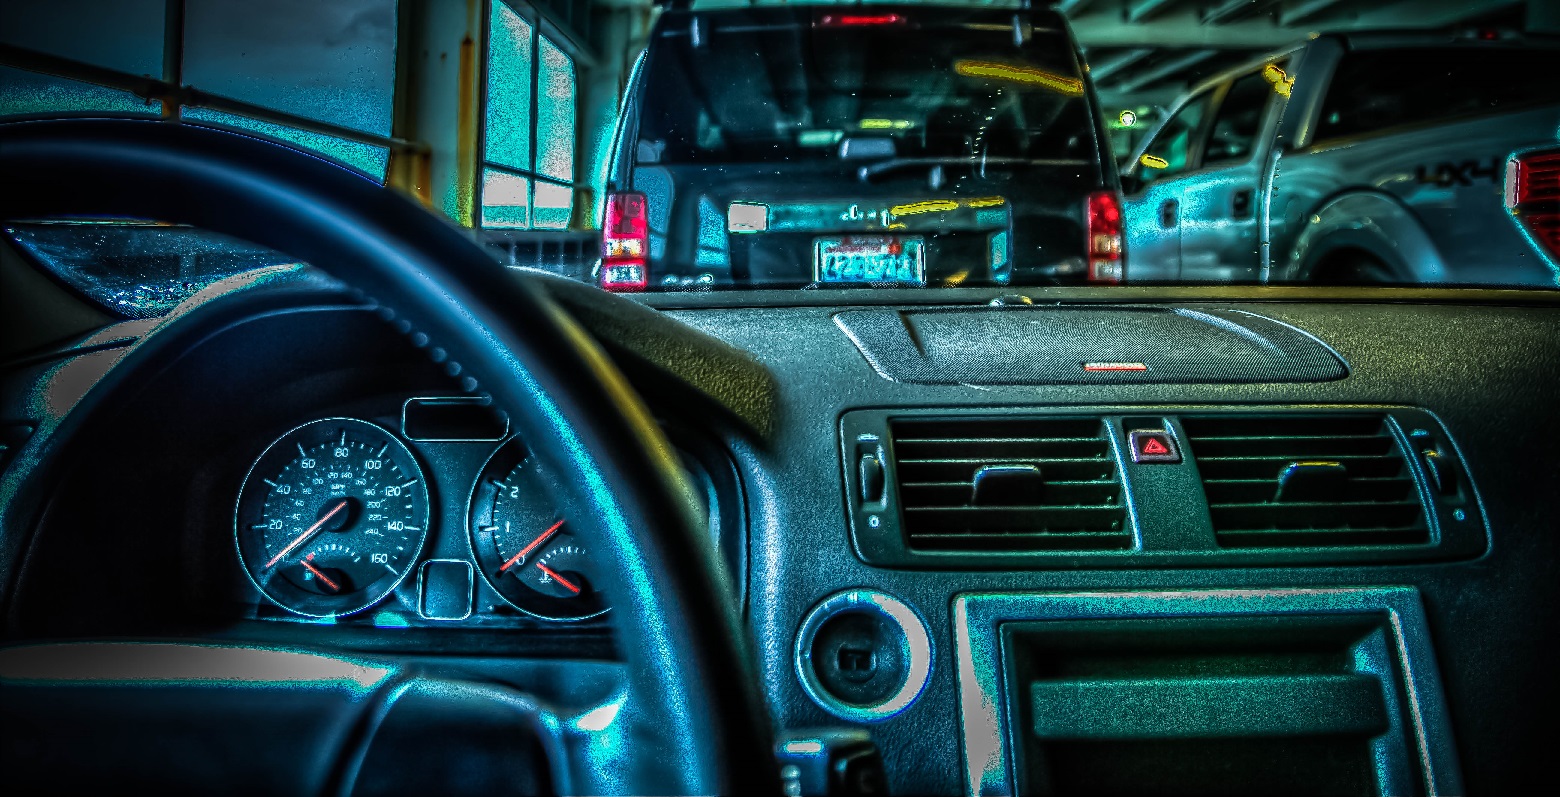 View from inside a vehicle - The Miller Insurance Agency Everett Washington